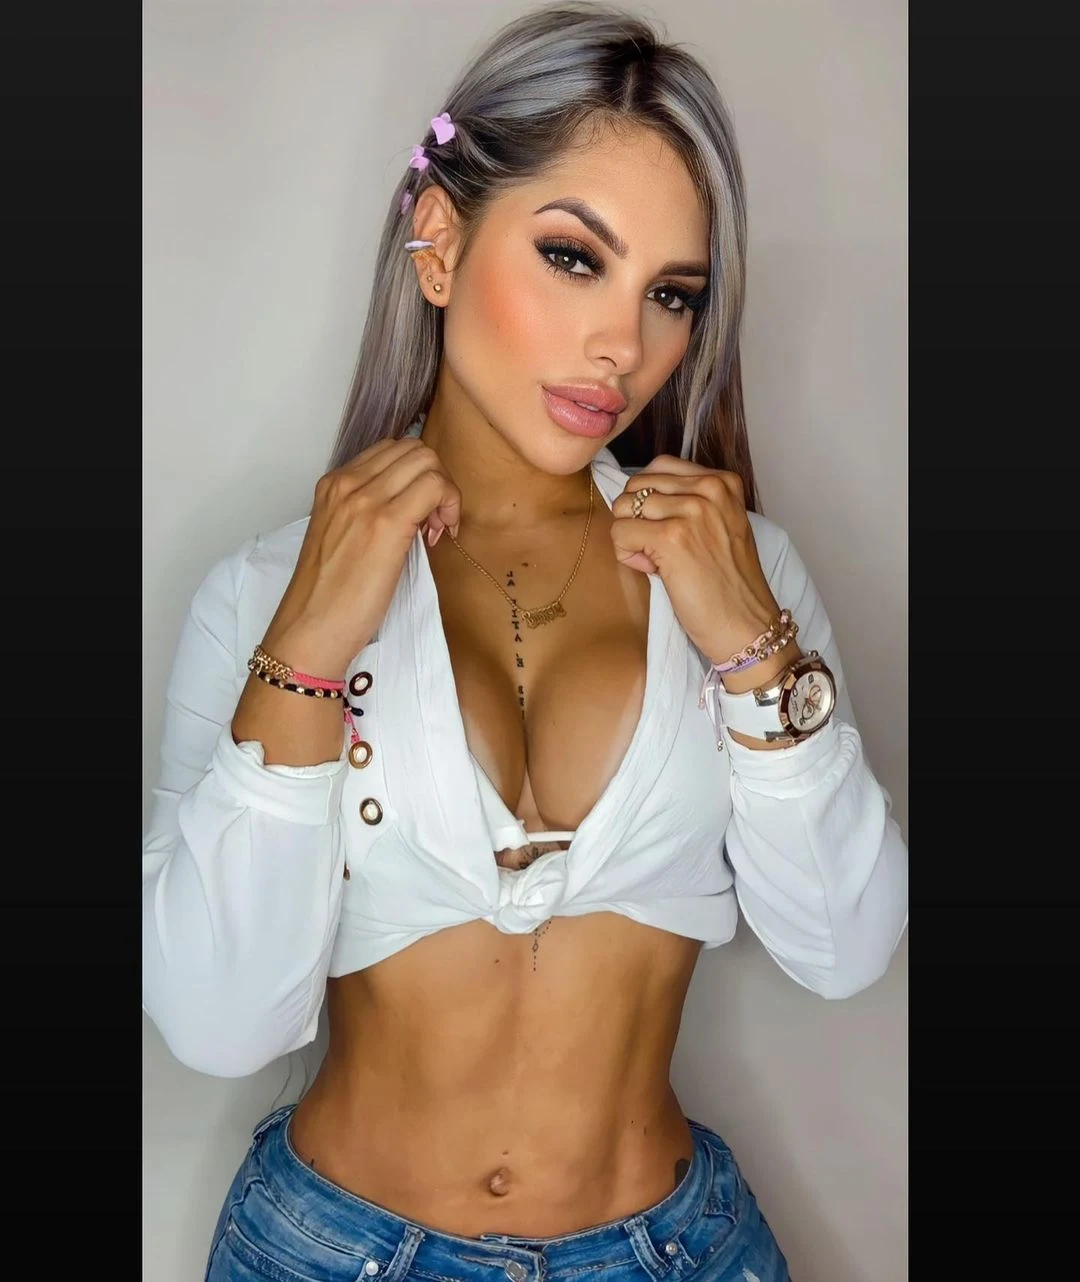 Colombia's sexiest policewoman takes social media by storm